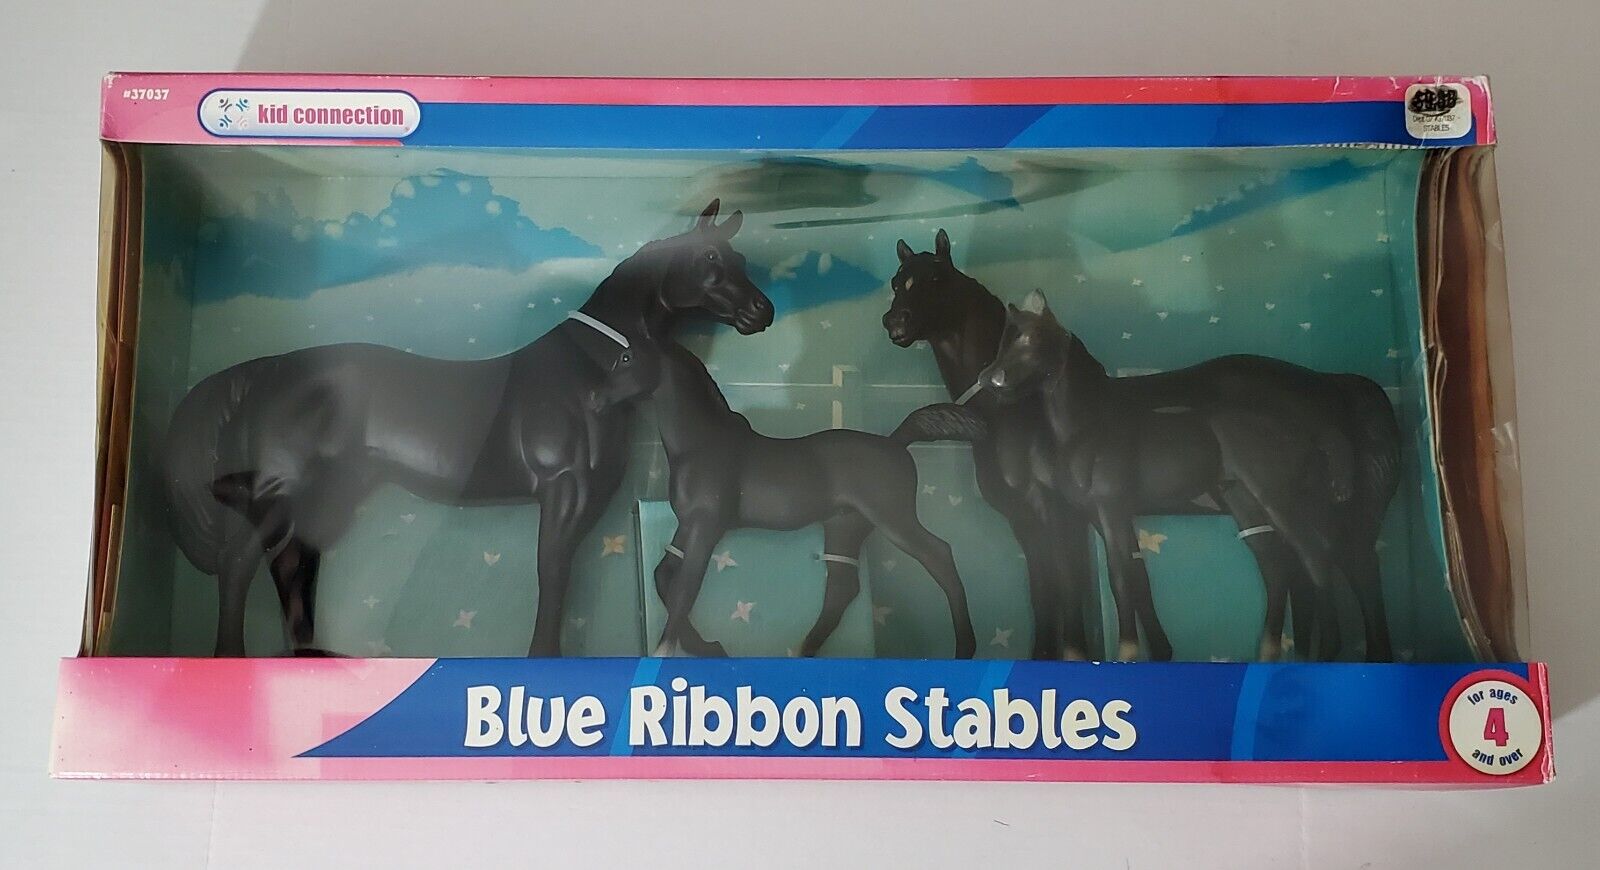 Vintage Rare Blue Ribbon Stables Horses By Kid Connection Toy Large NEW